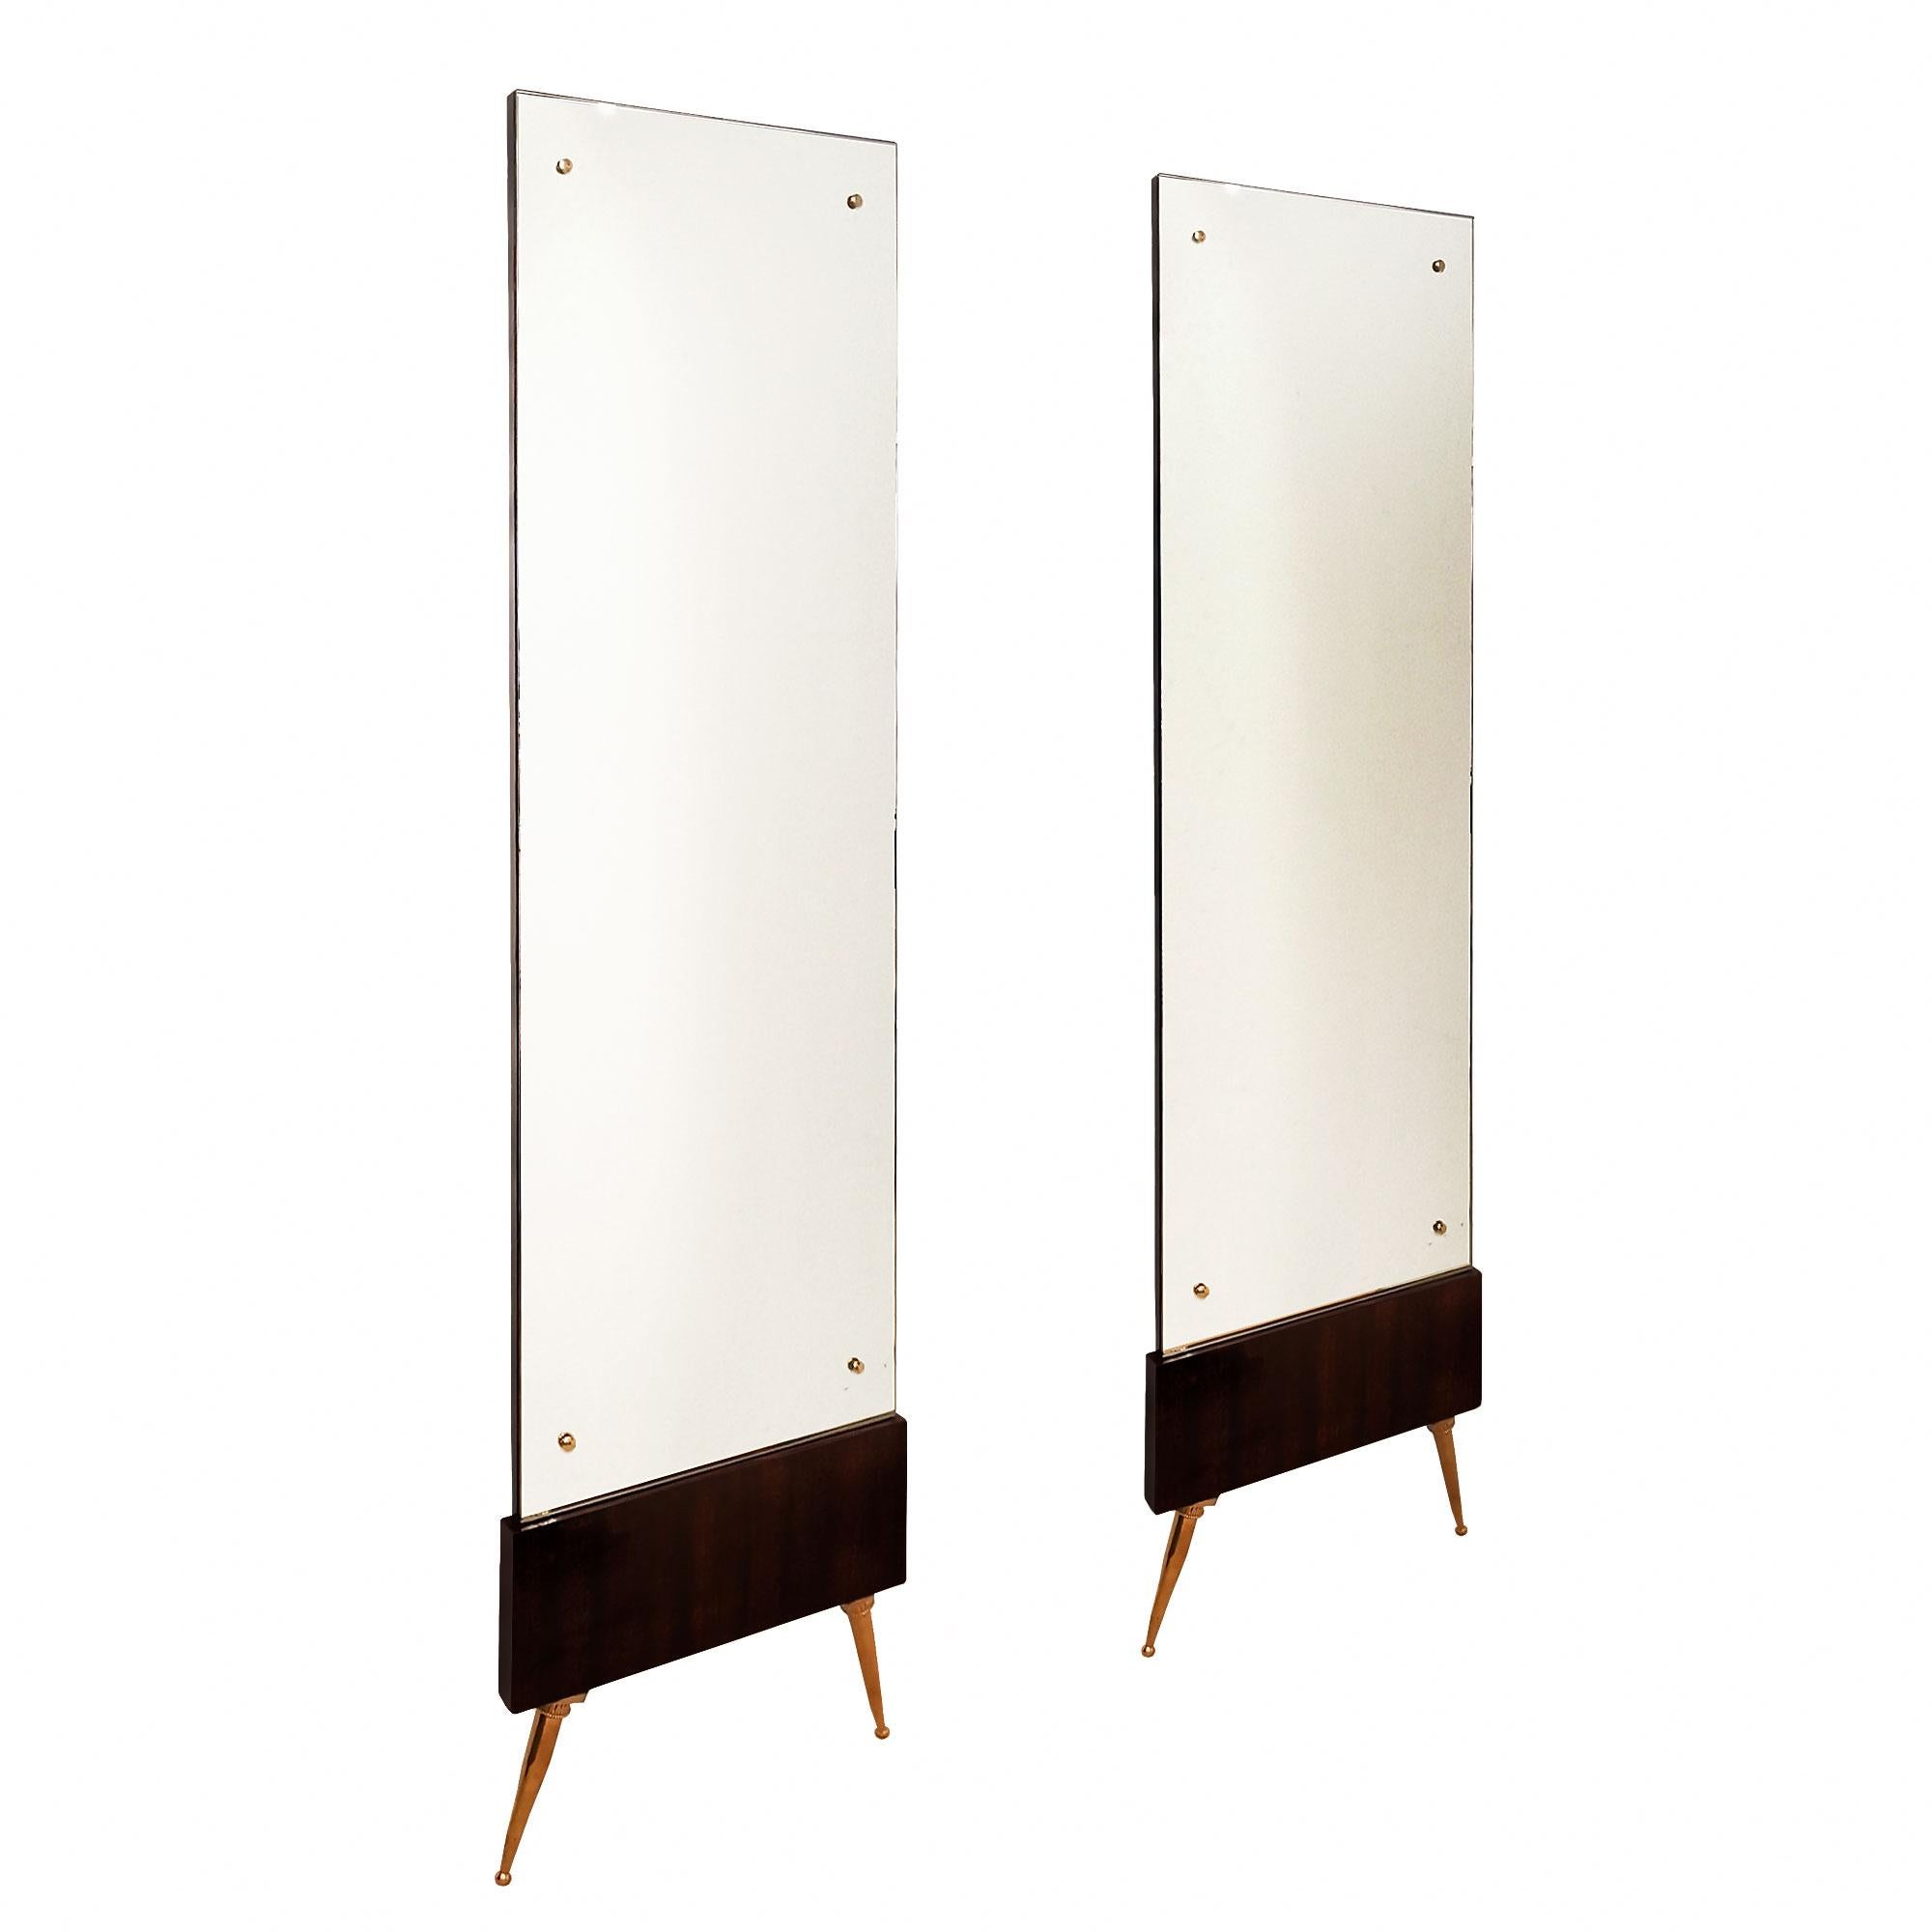 Pair of tall mirrors with a solid wood back, stained and French polished mahogany base, polished brass feet and screw covers.

Italy c. 1950.